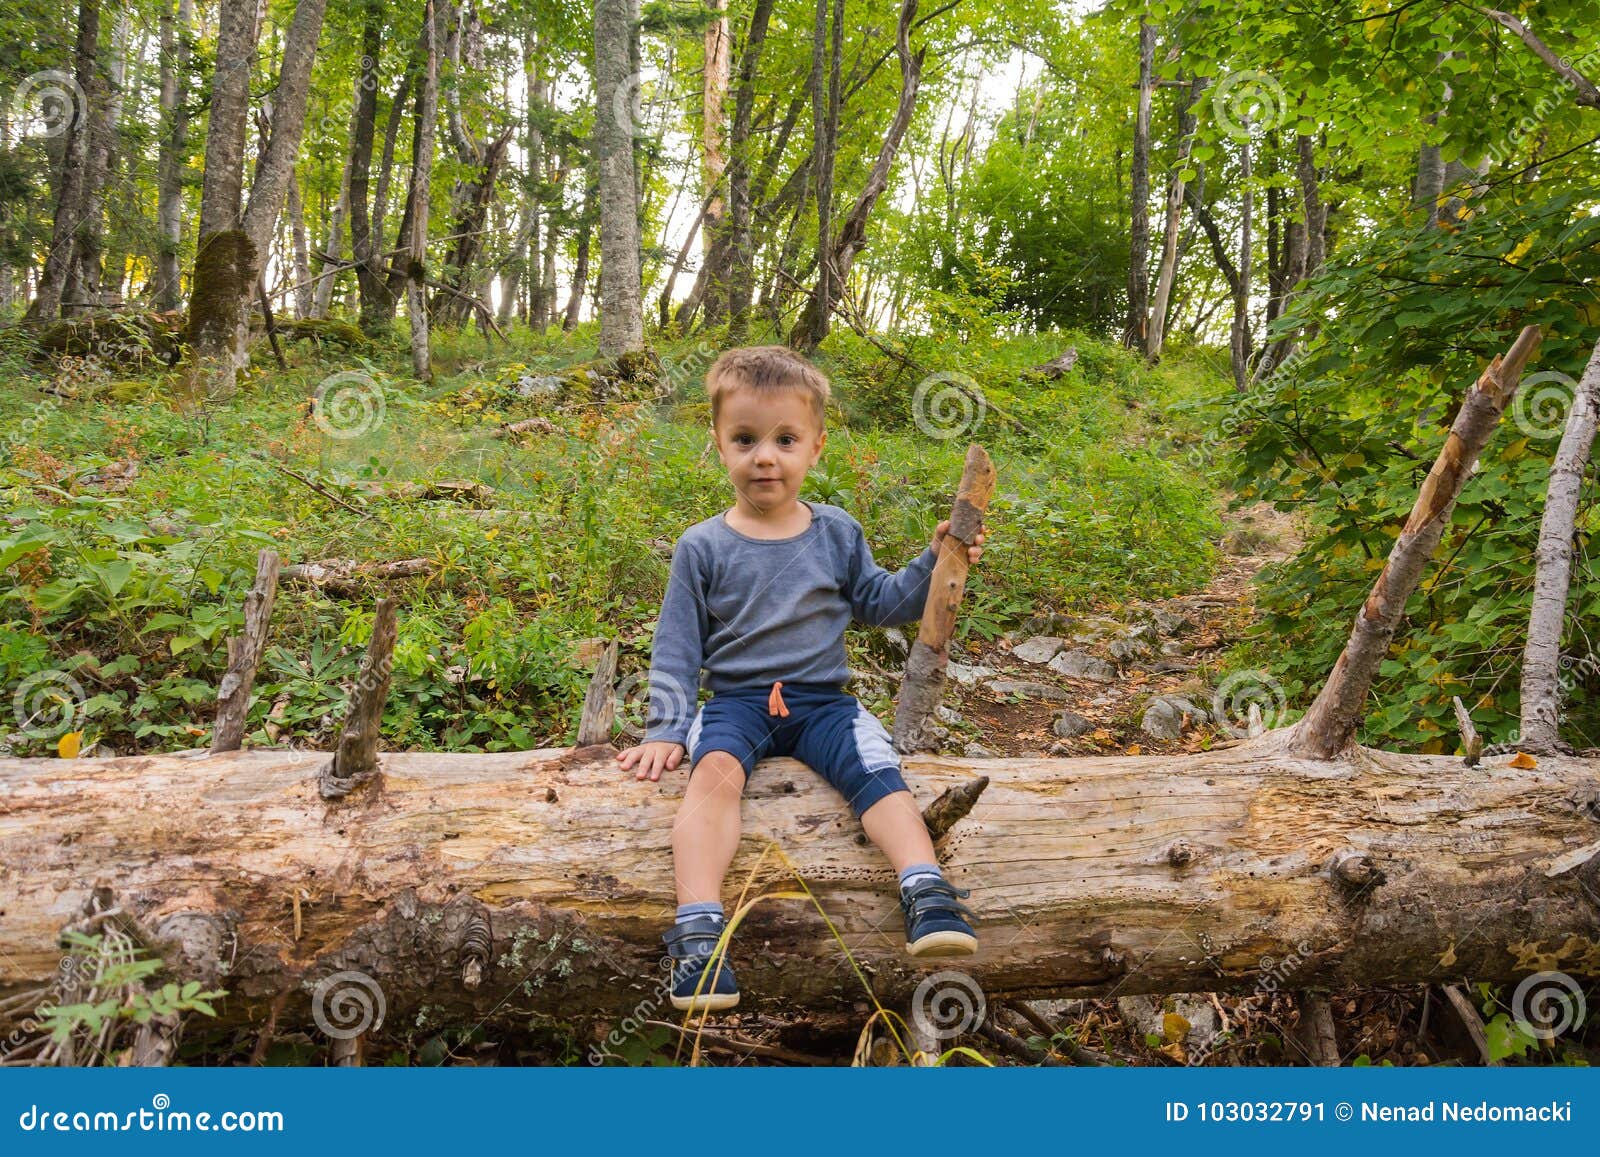 Pretty Boy in Nature at Sunset Stock Image - Image of park, background